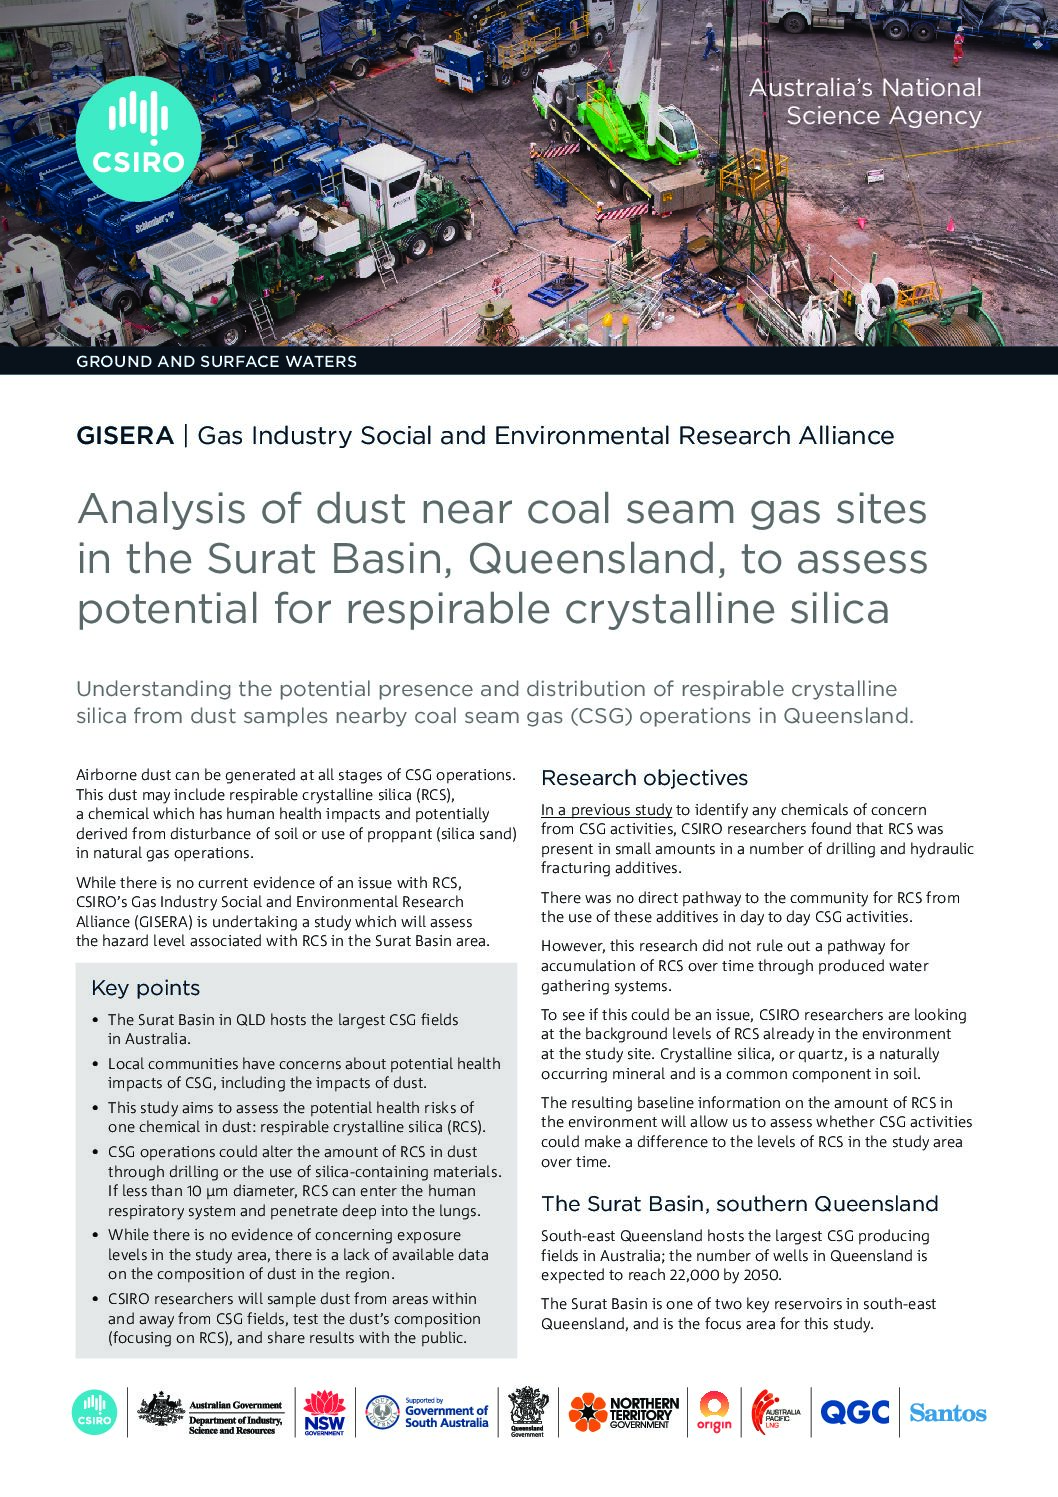 Analysis of dust near CSG sites to assess potential for respirable